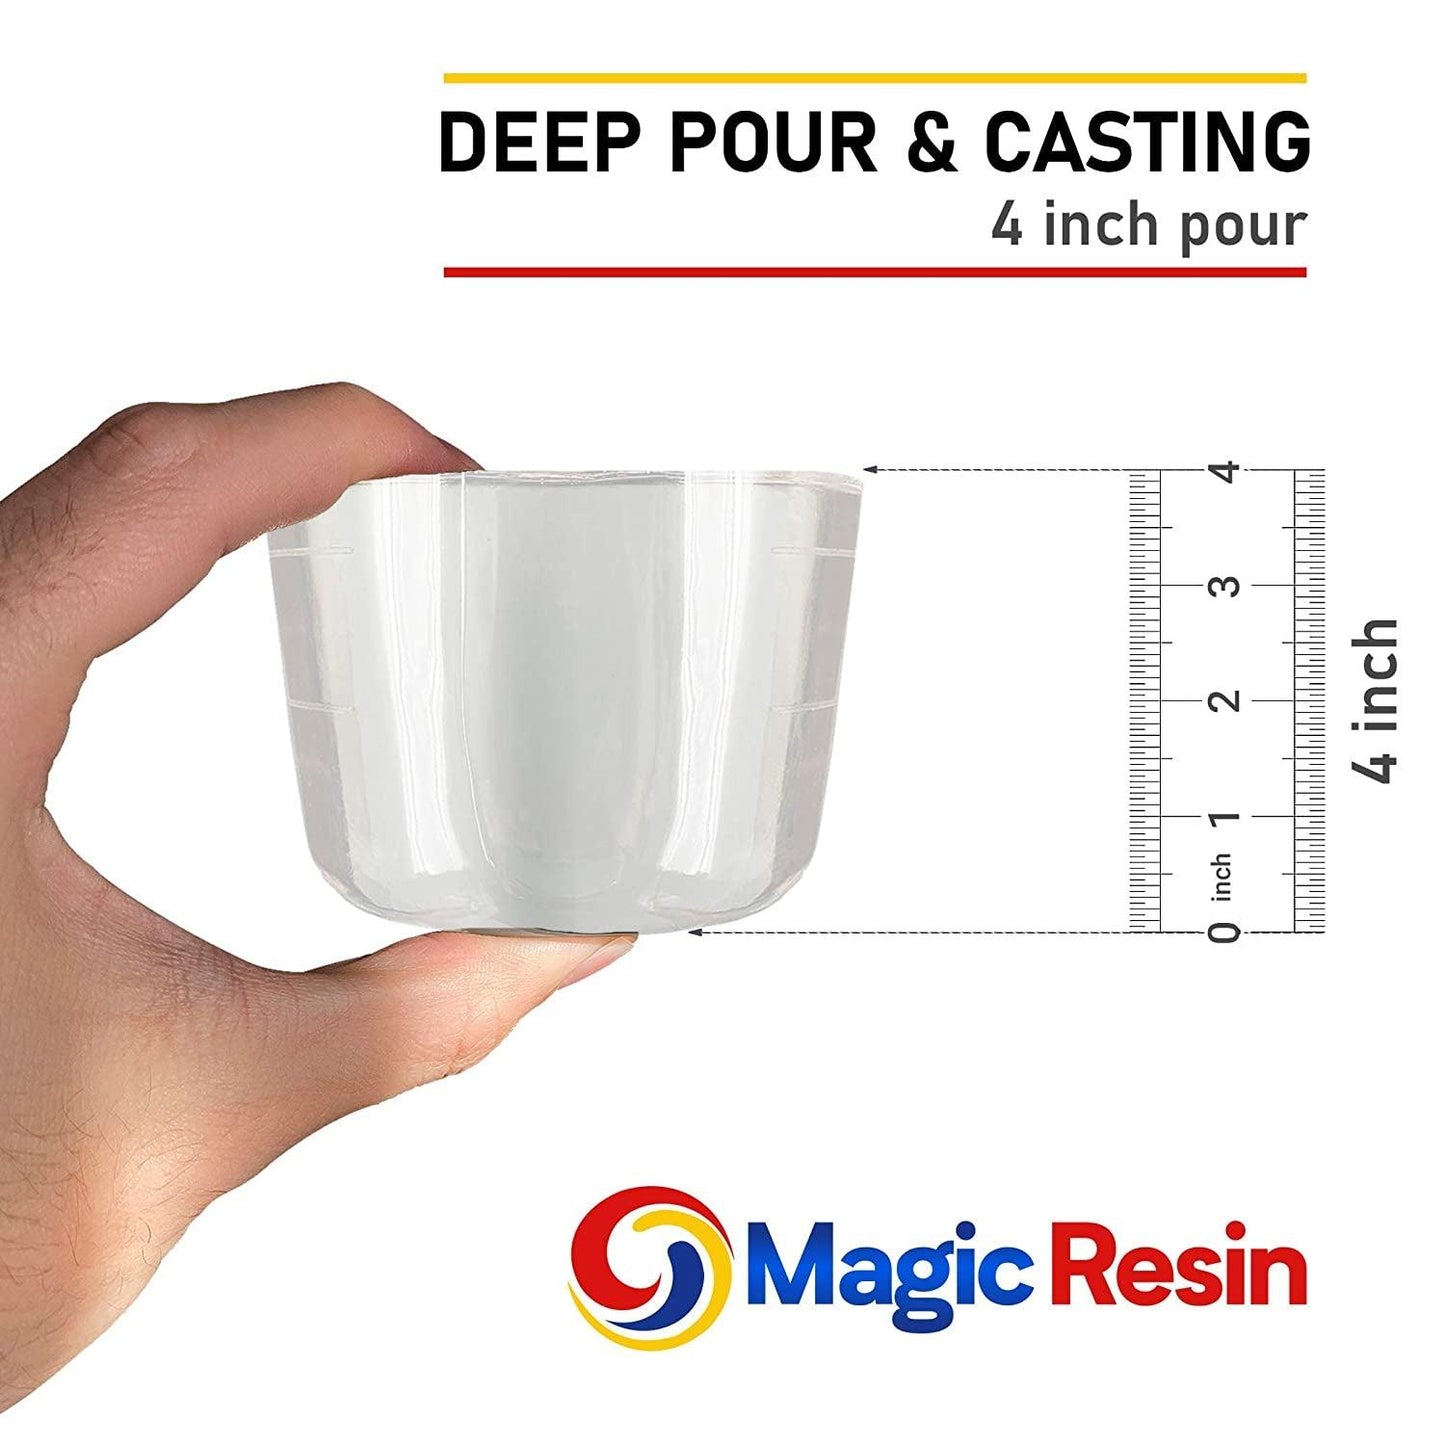 Deep Pour Epoxy Resin for River Table | 3 Gallon (11.4 L) | 4'' Deep Pour & Casting Epoxy Resin Kit | Low Odor | Crystal Clear and High Gloss | for River Tables, Deep Pour, Casting - WoodArtSupply